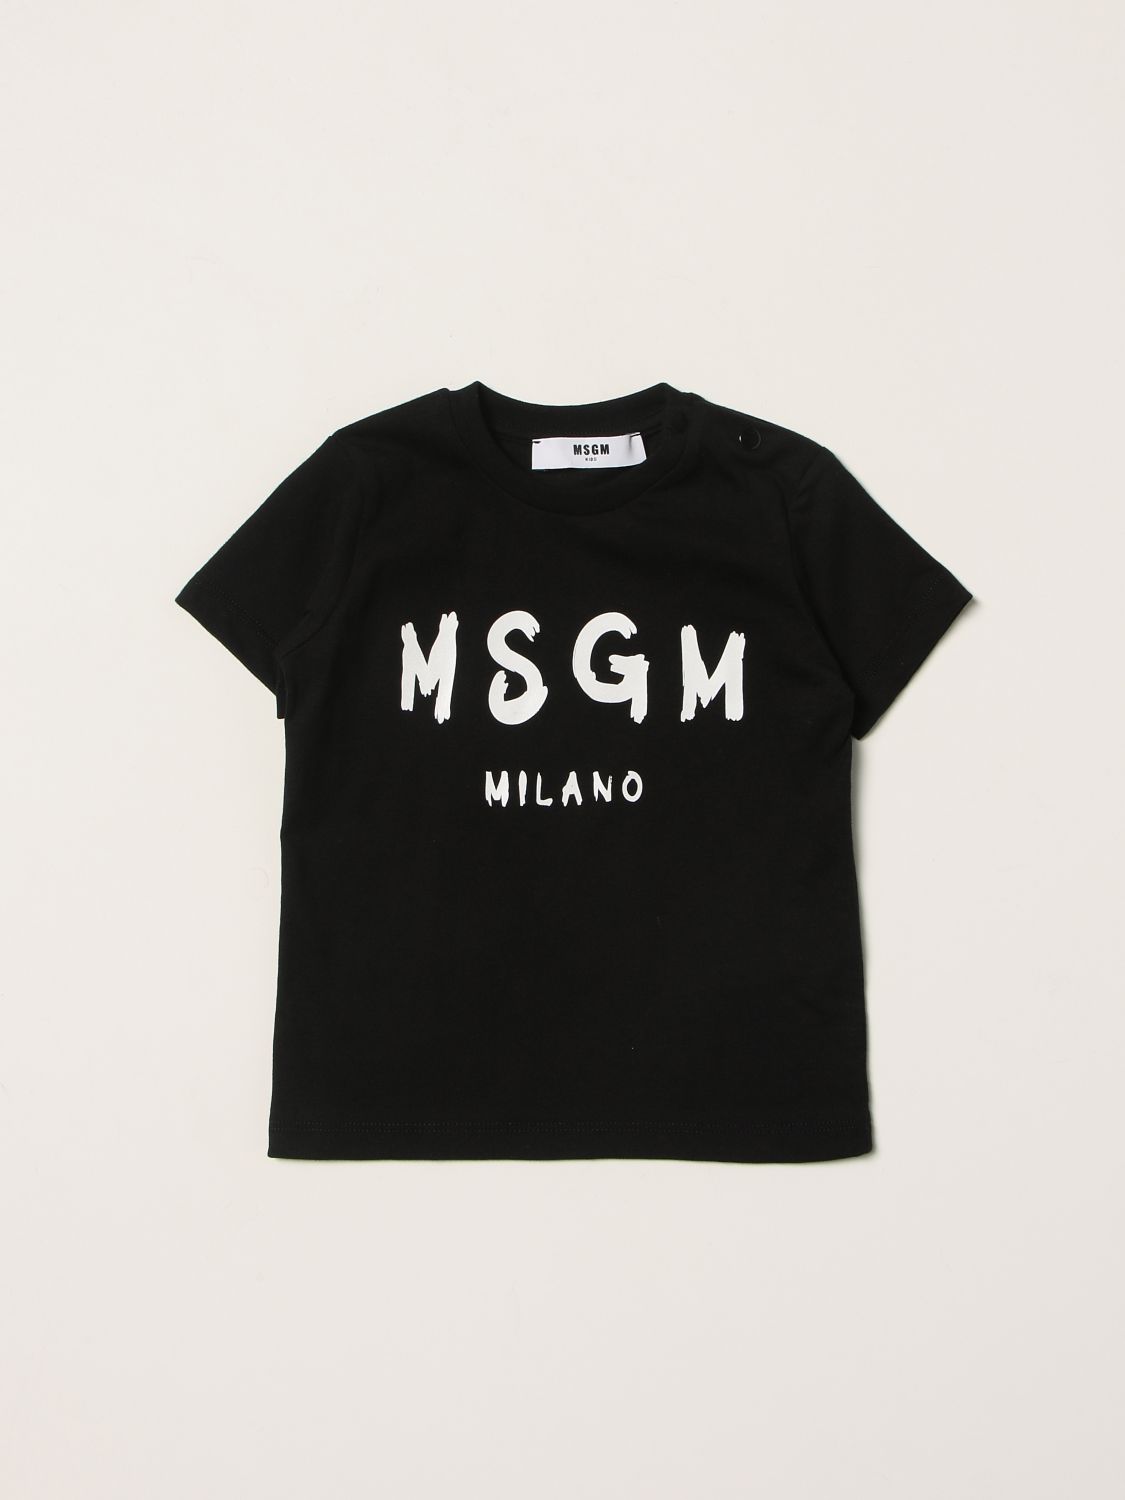 Msgm Kids Spring Summer 2022 new collection 2022 online on 